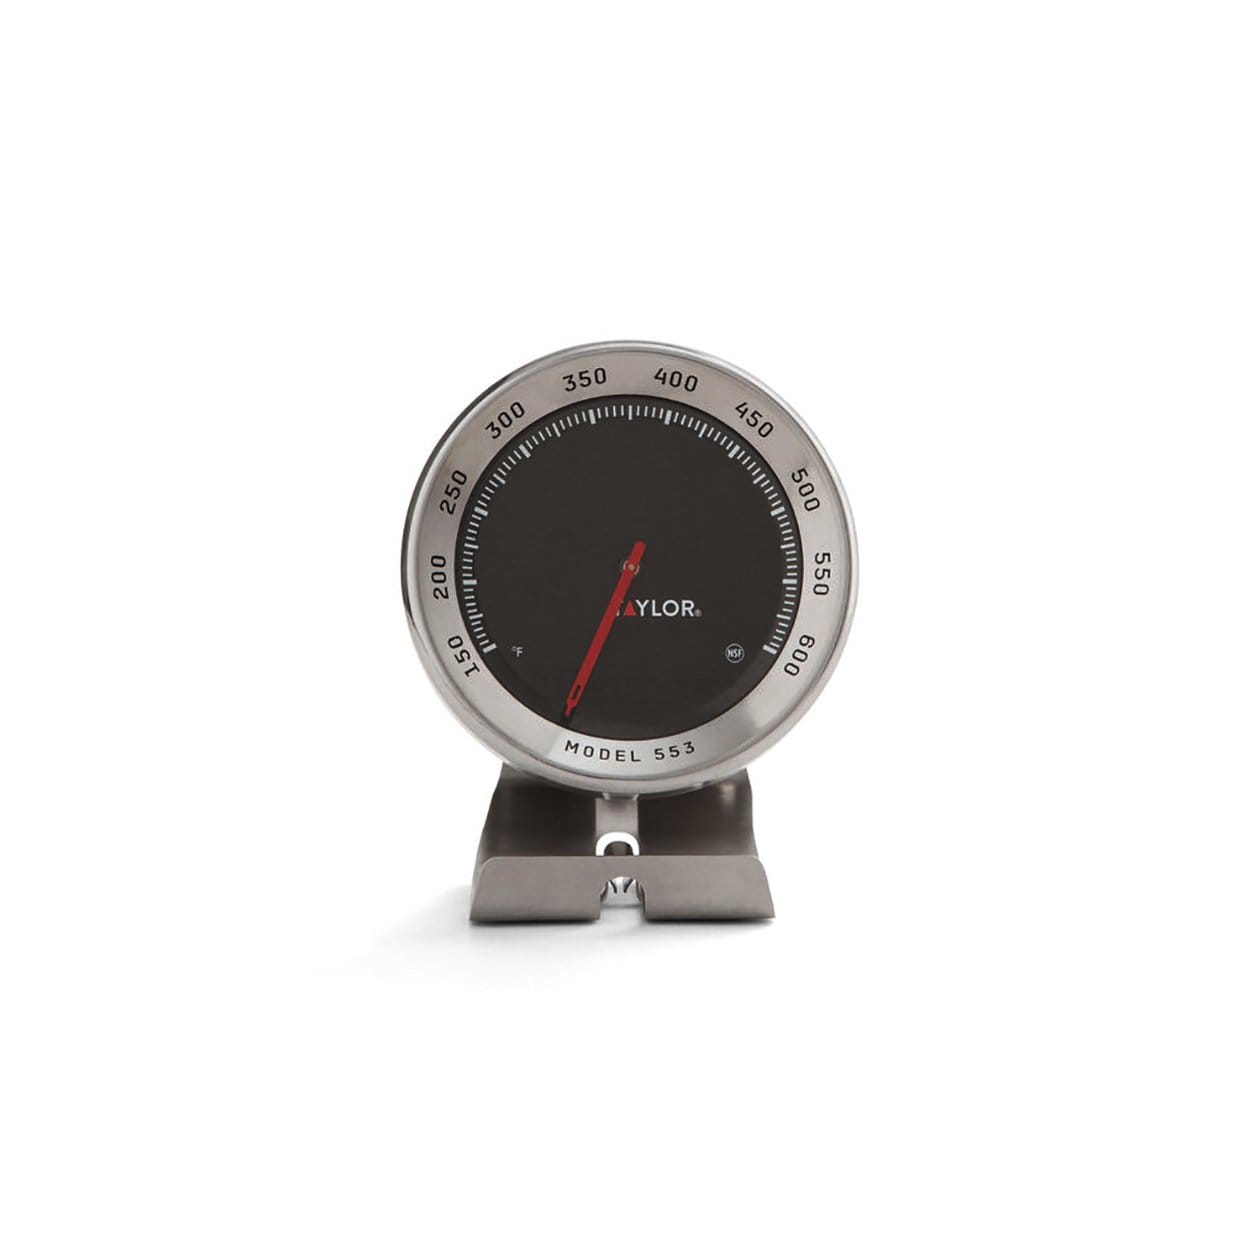 Taylor Precision Products Taylor Classic Series Large Dial Oven Thermometer